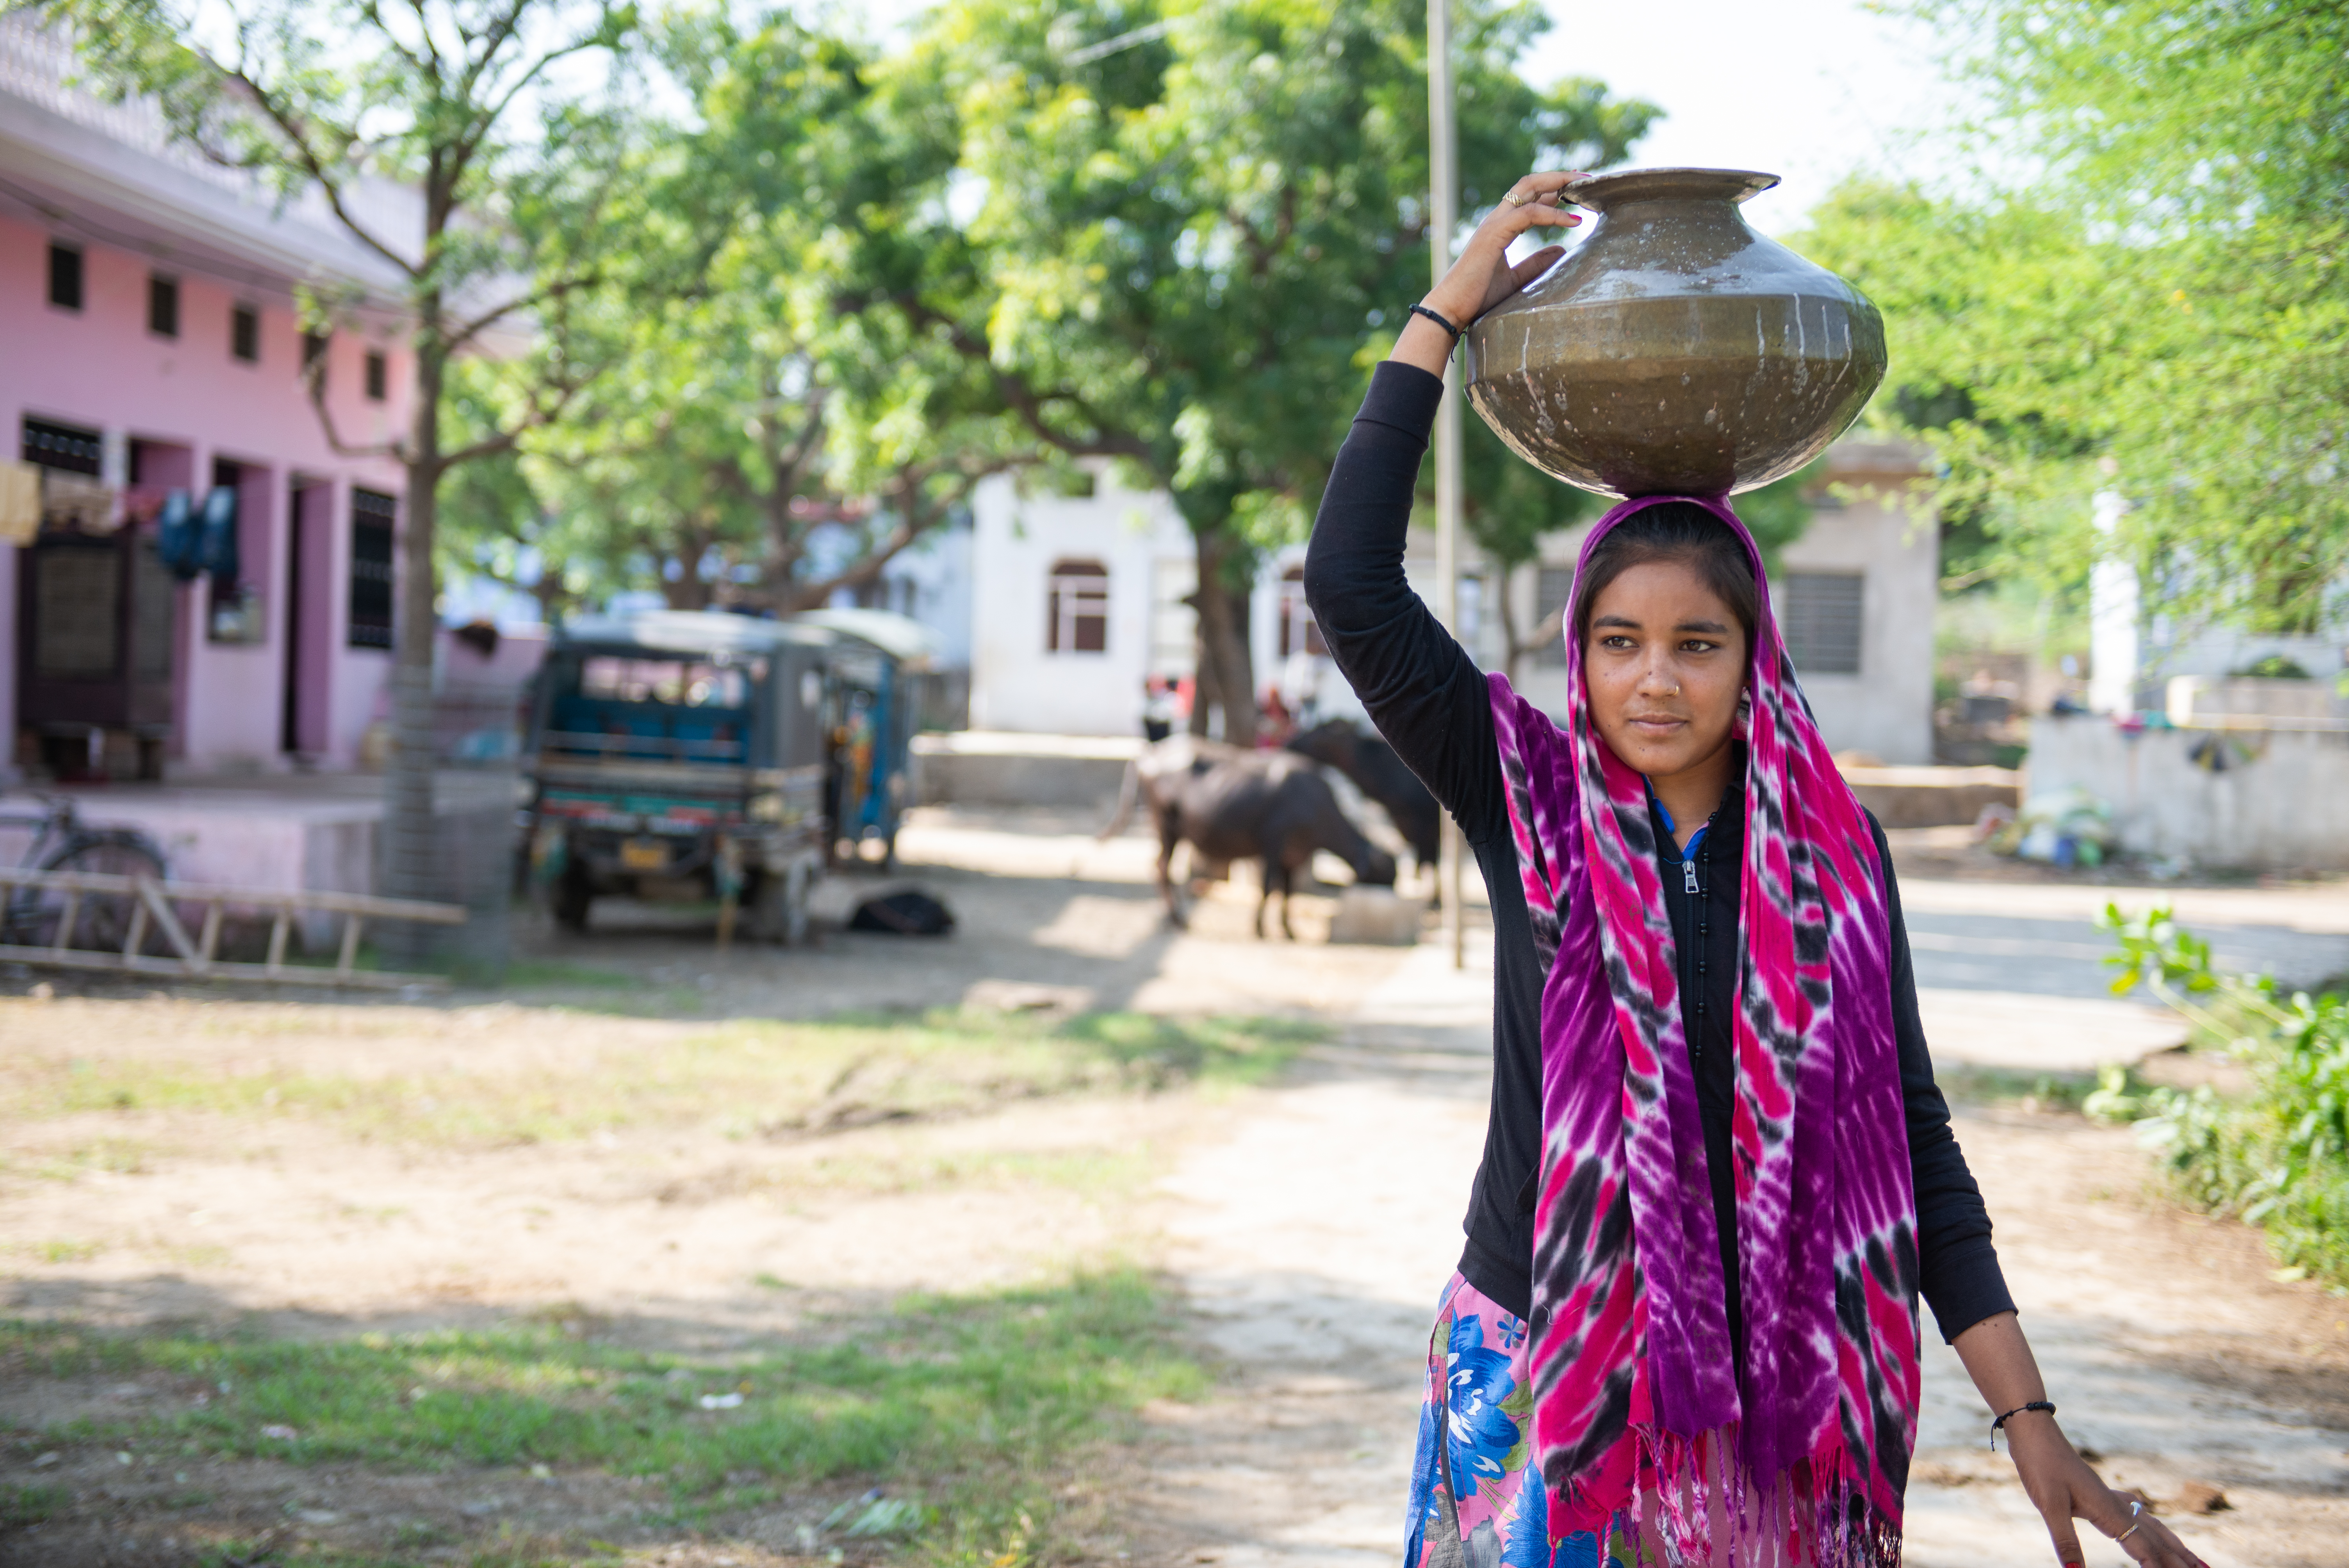 Mosam, 17, collects water during the morning.